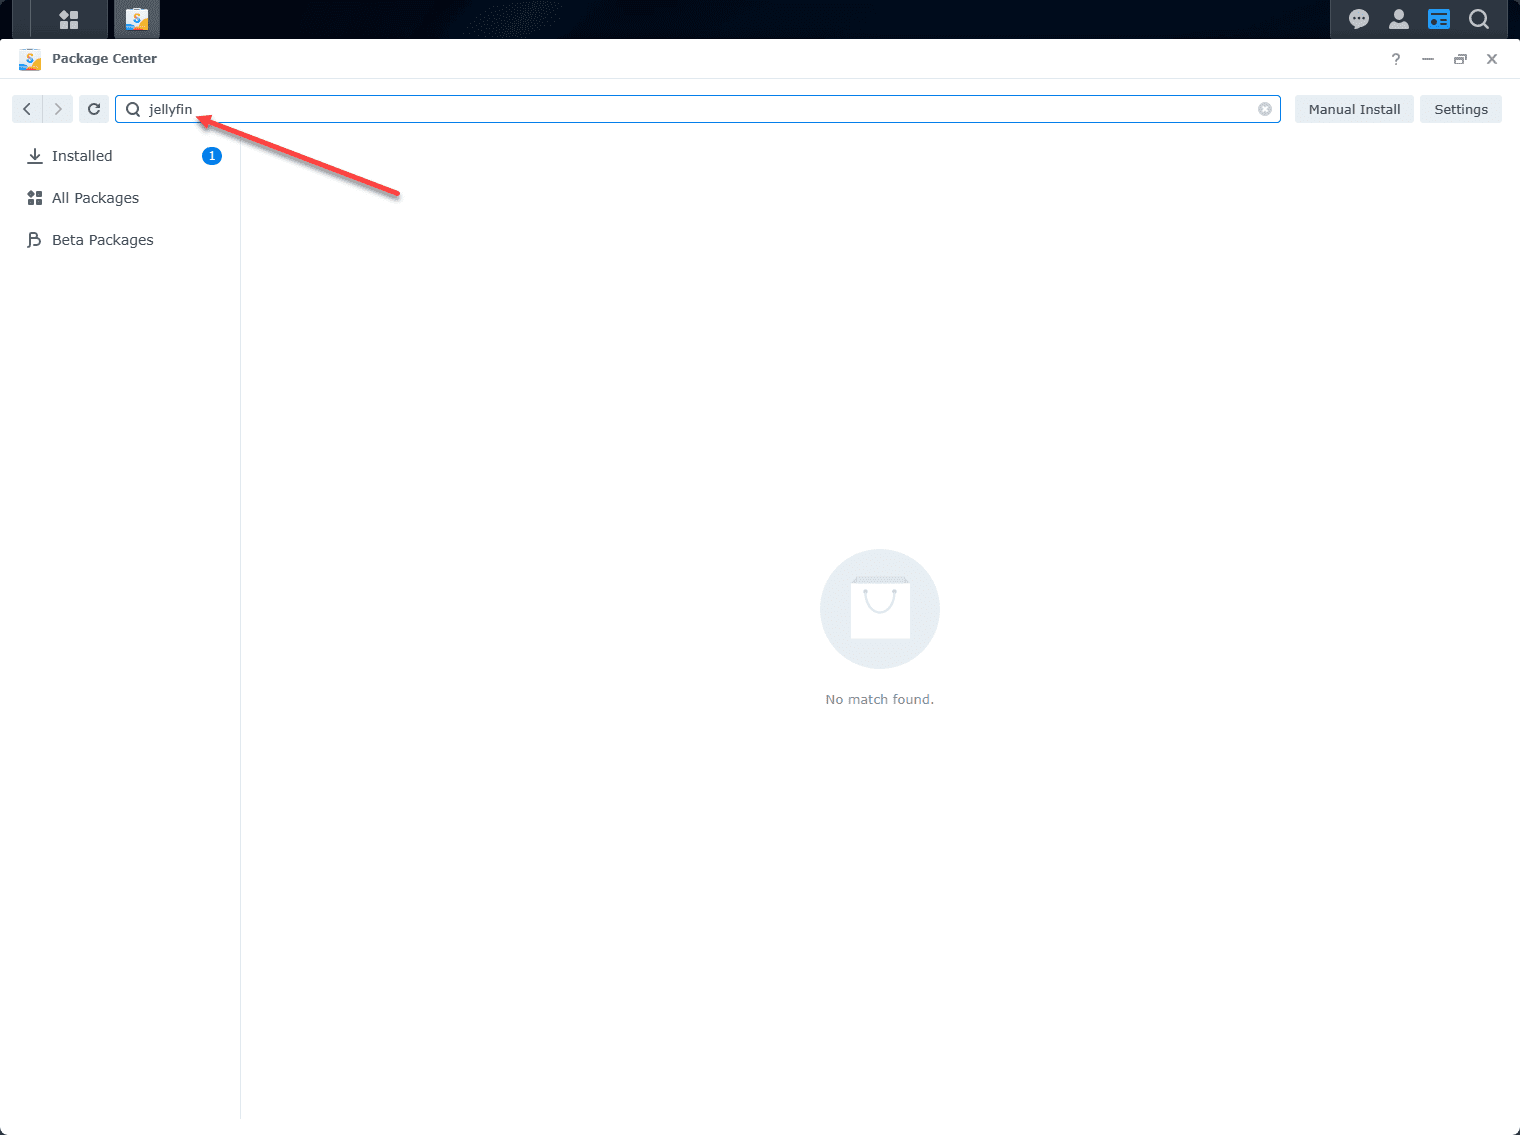 Searching for jellyfin in synology package center